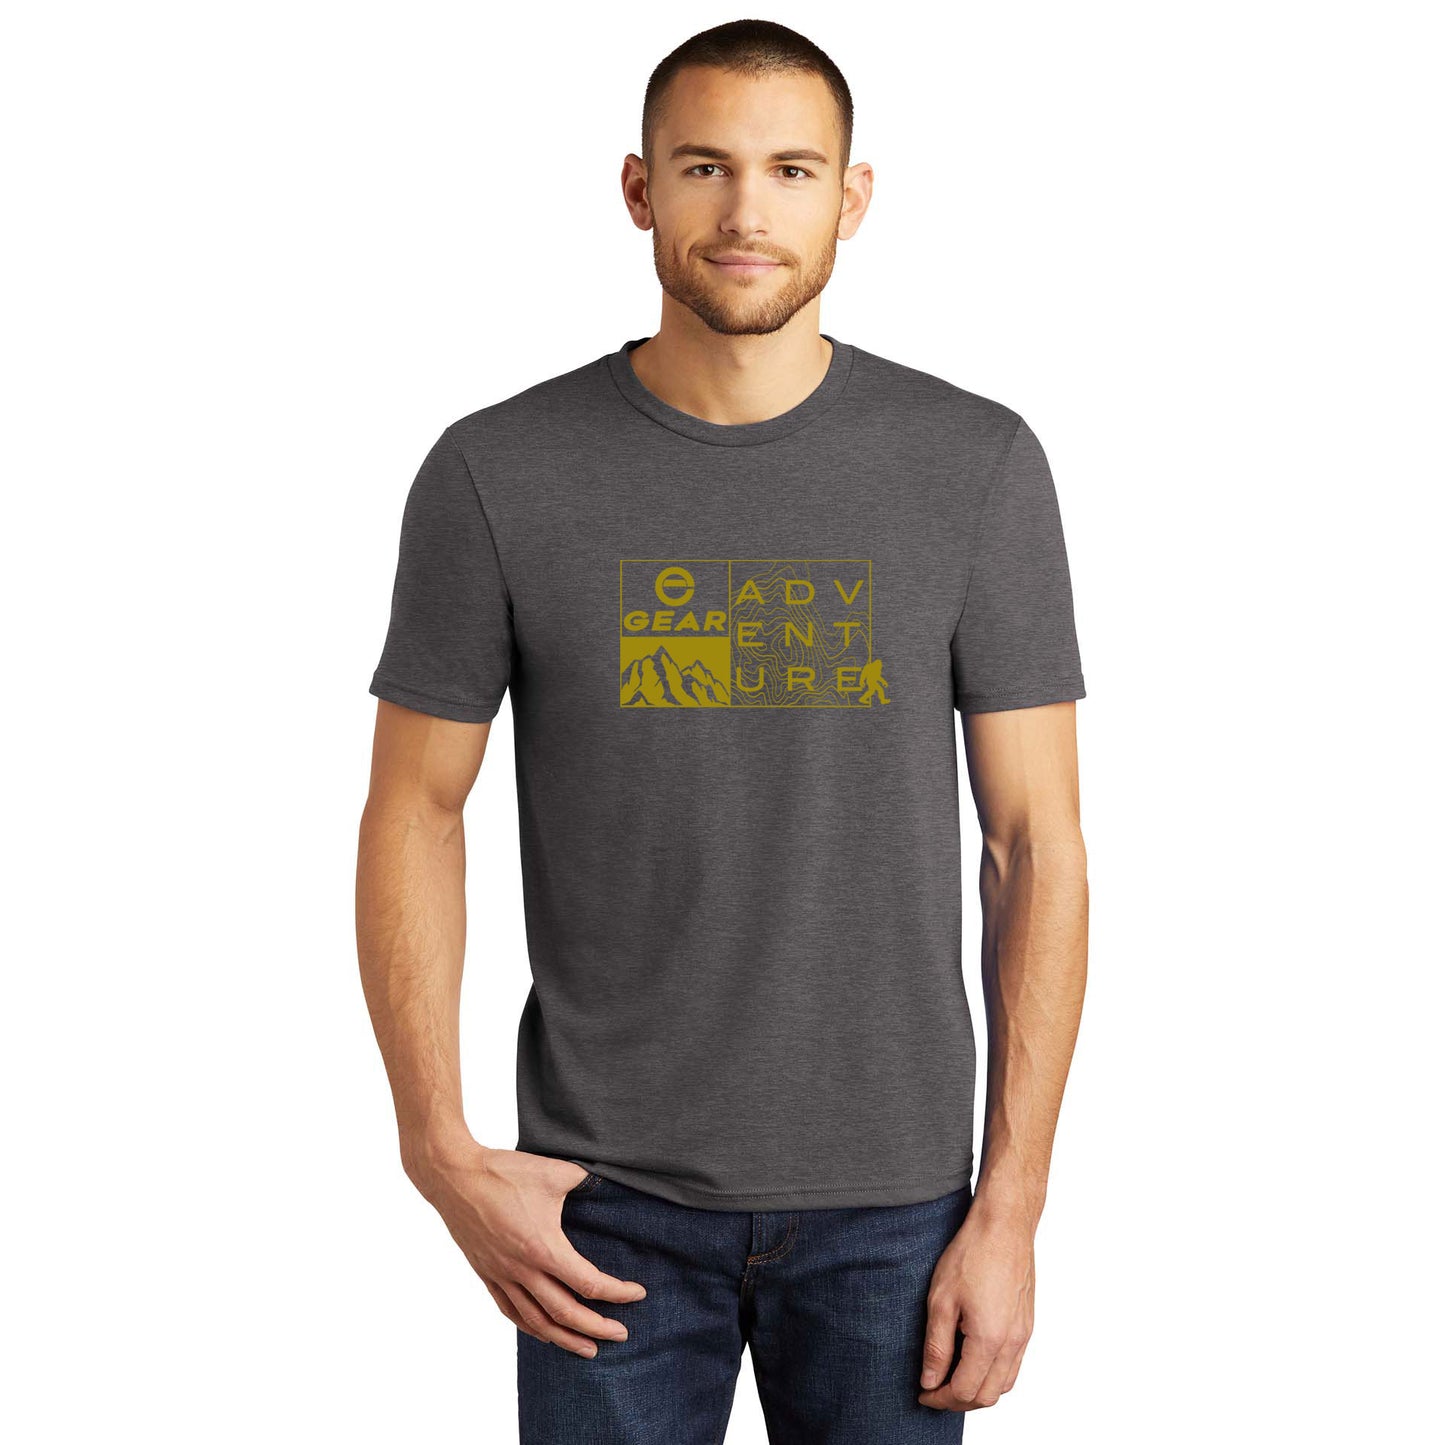 Enthusiast Gear Outdoor Adventure Tri-Blend T-Shirt Heathered Charcoal